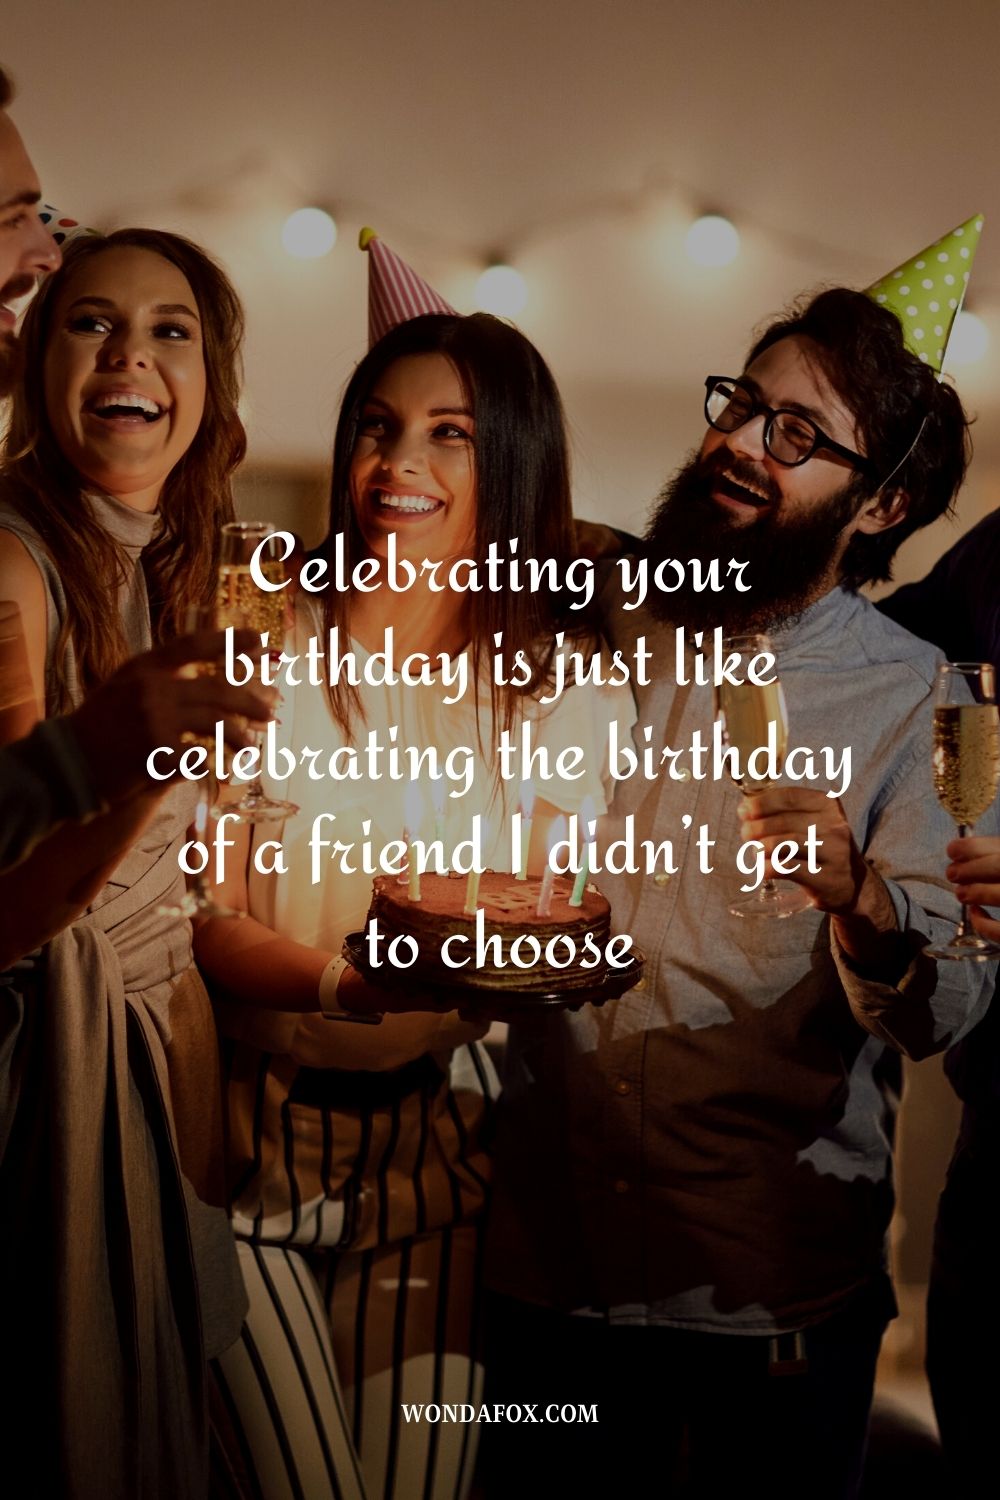 Celebrating your birthday is just like celebrating the birthday of a friend I didn’t get to choose